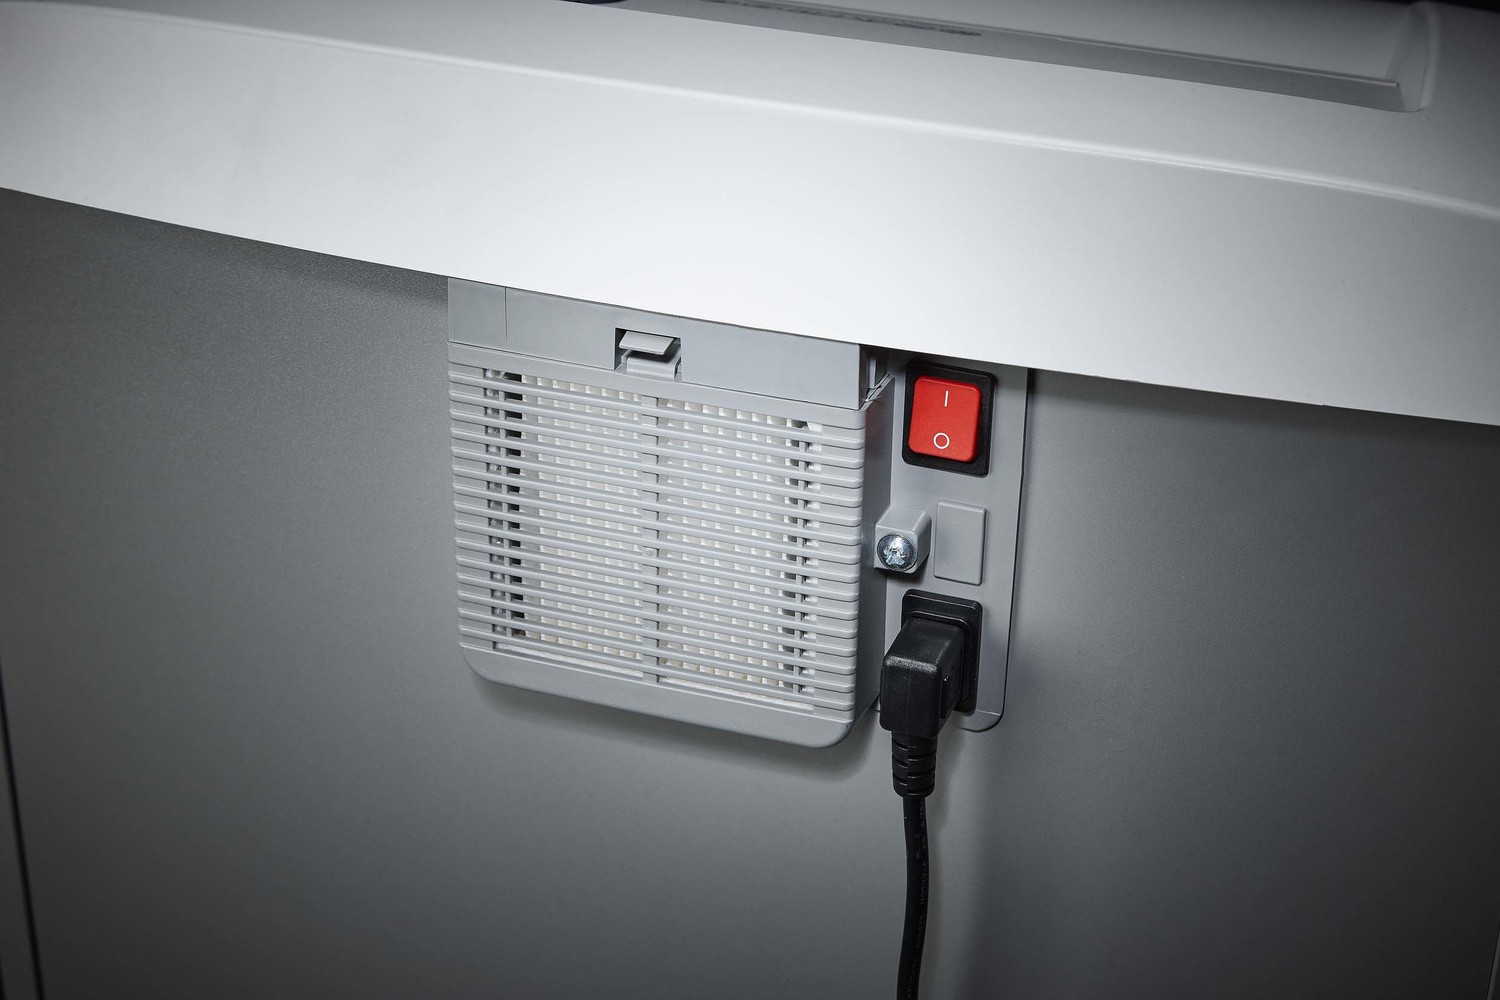 Detachable IEC power plug makes the document shredder quick and easy to move from A to B